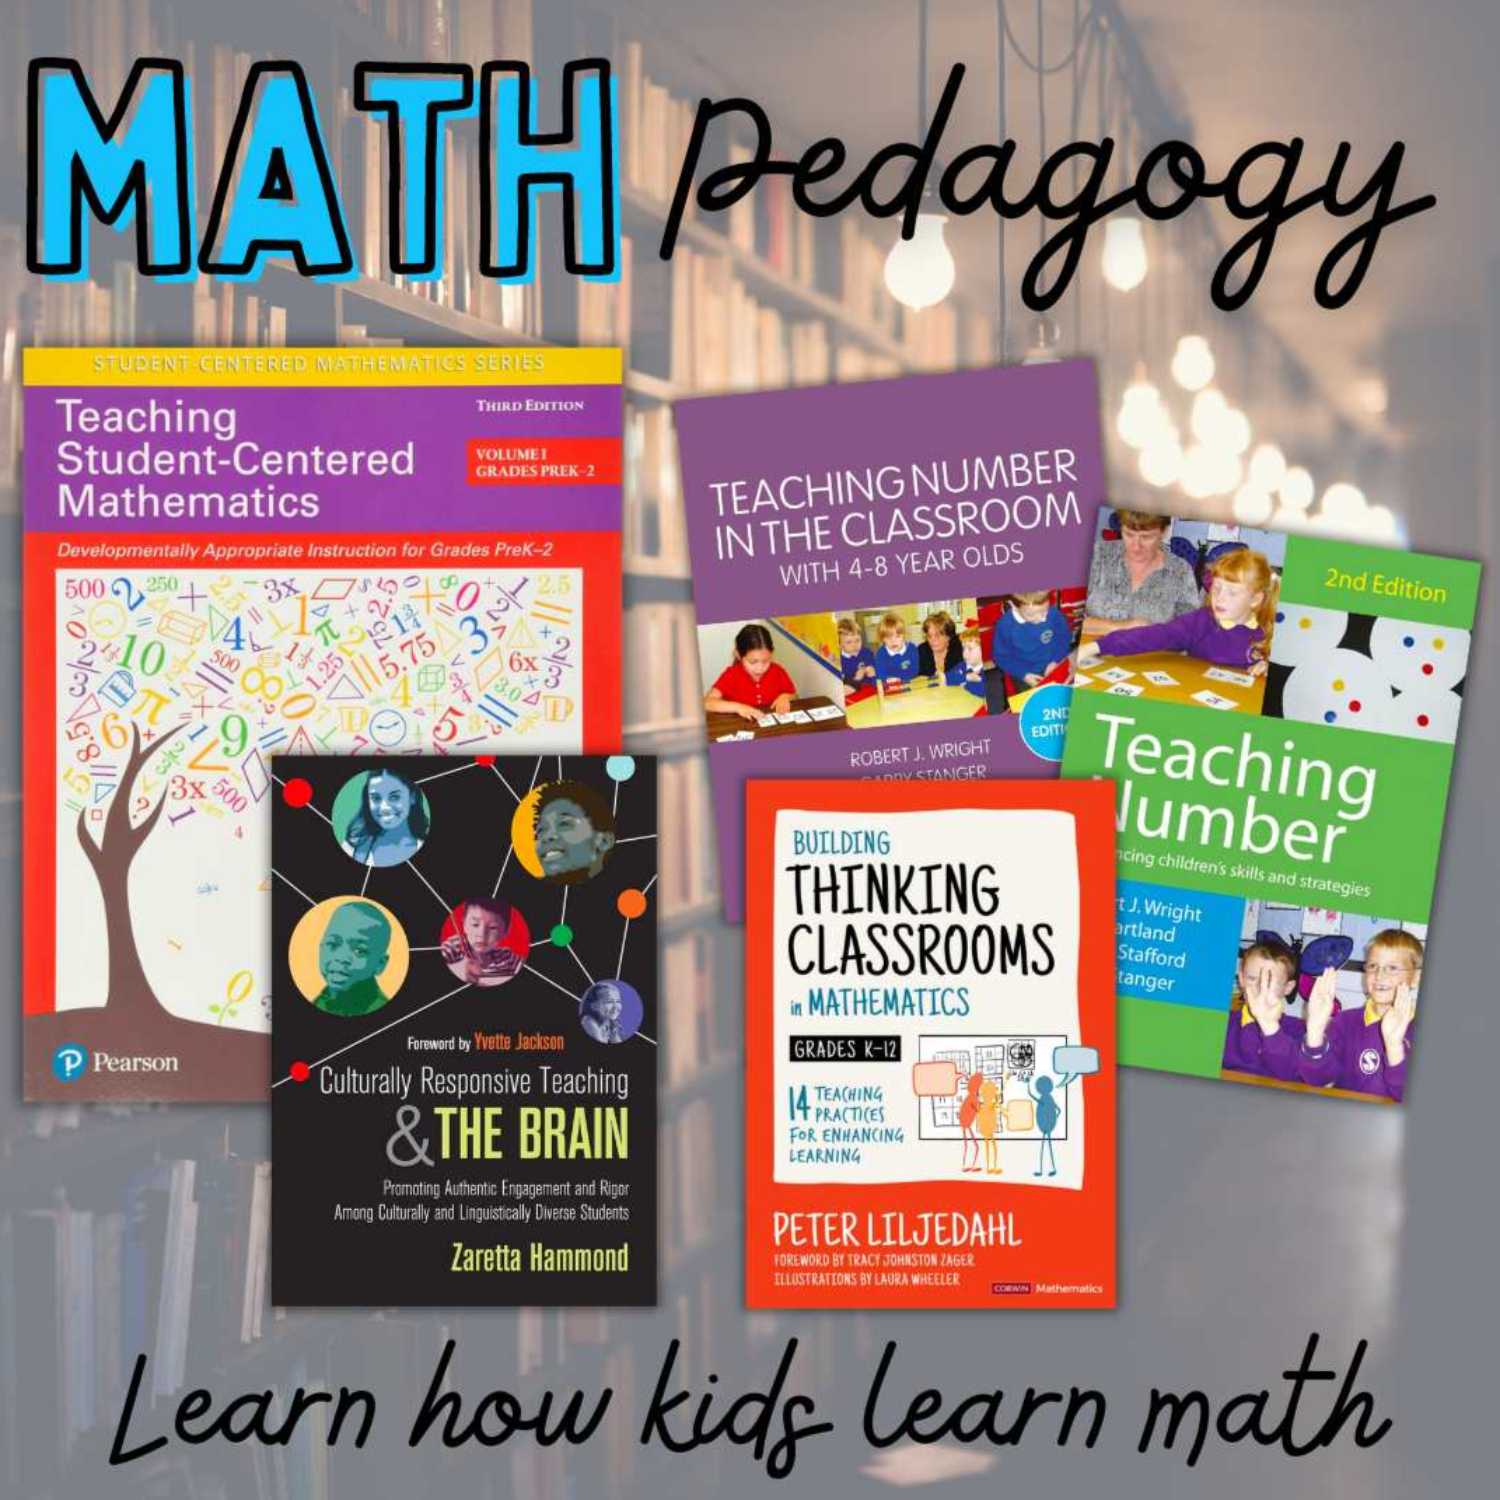 Ep: 26 Book Recommendations to Learn How Kids Learn Math